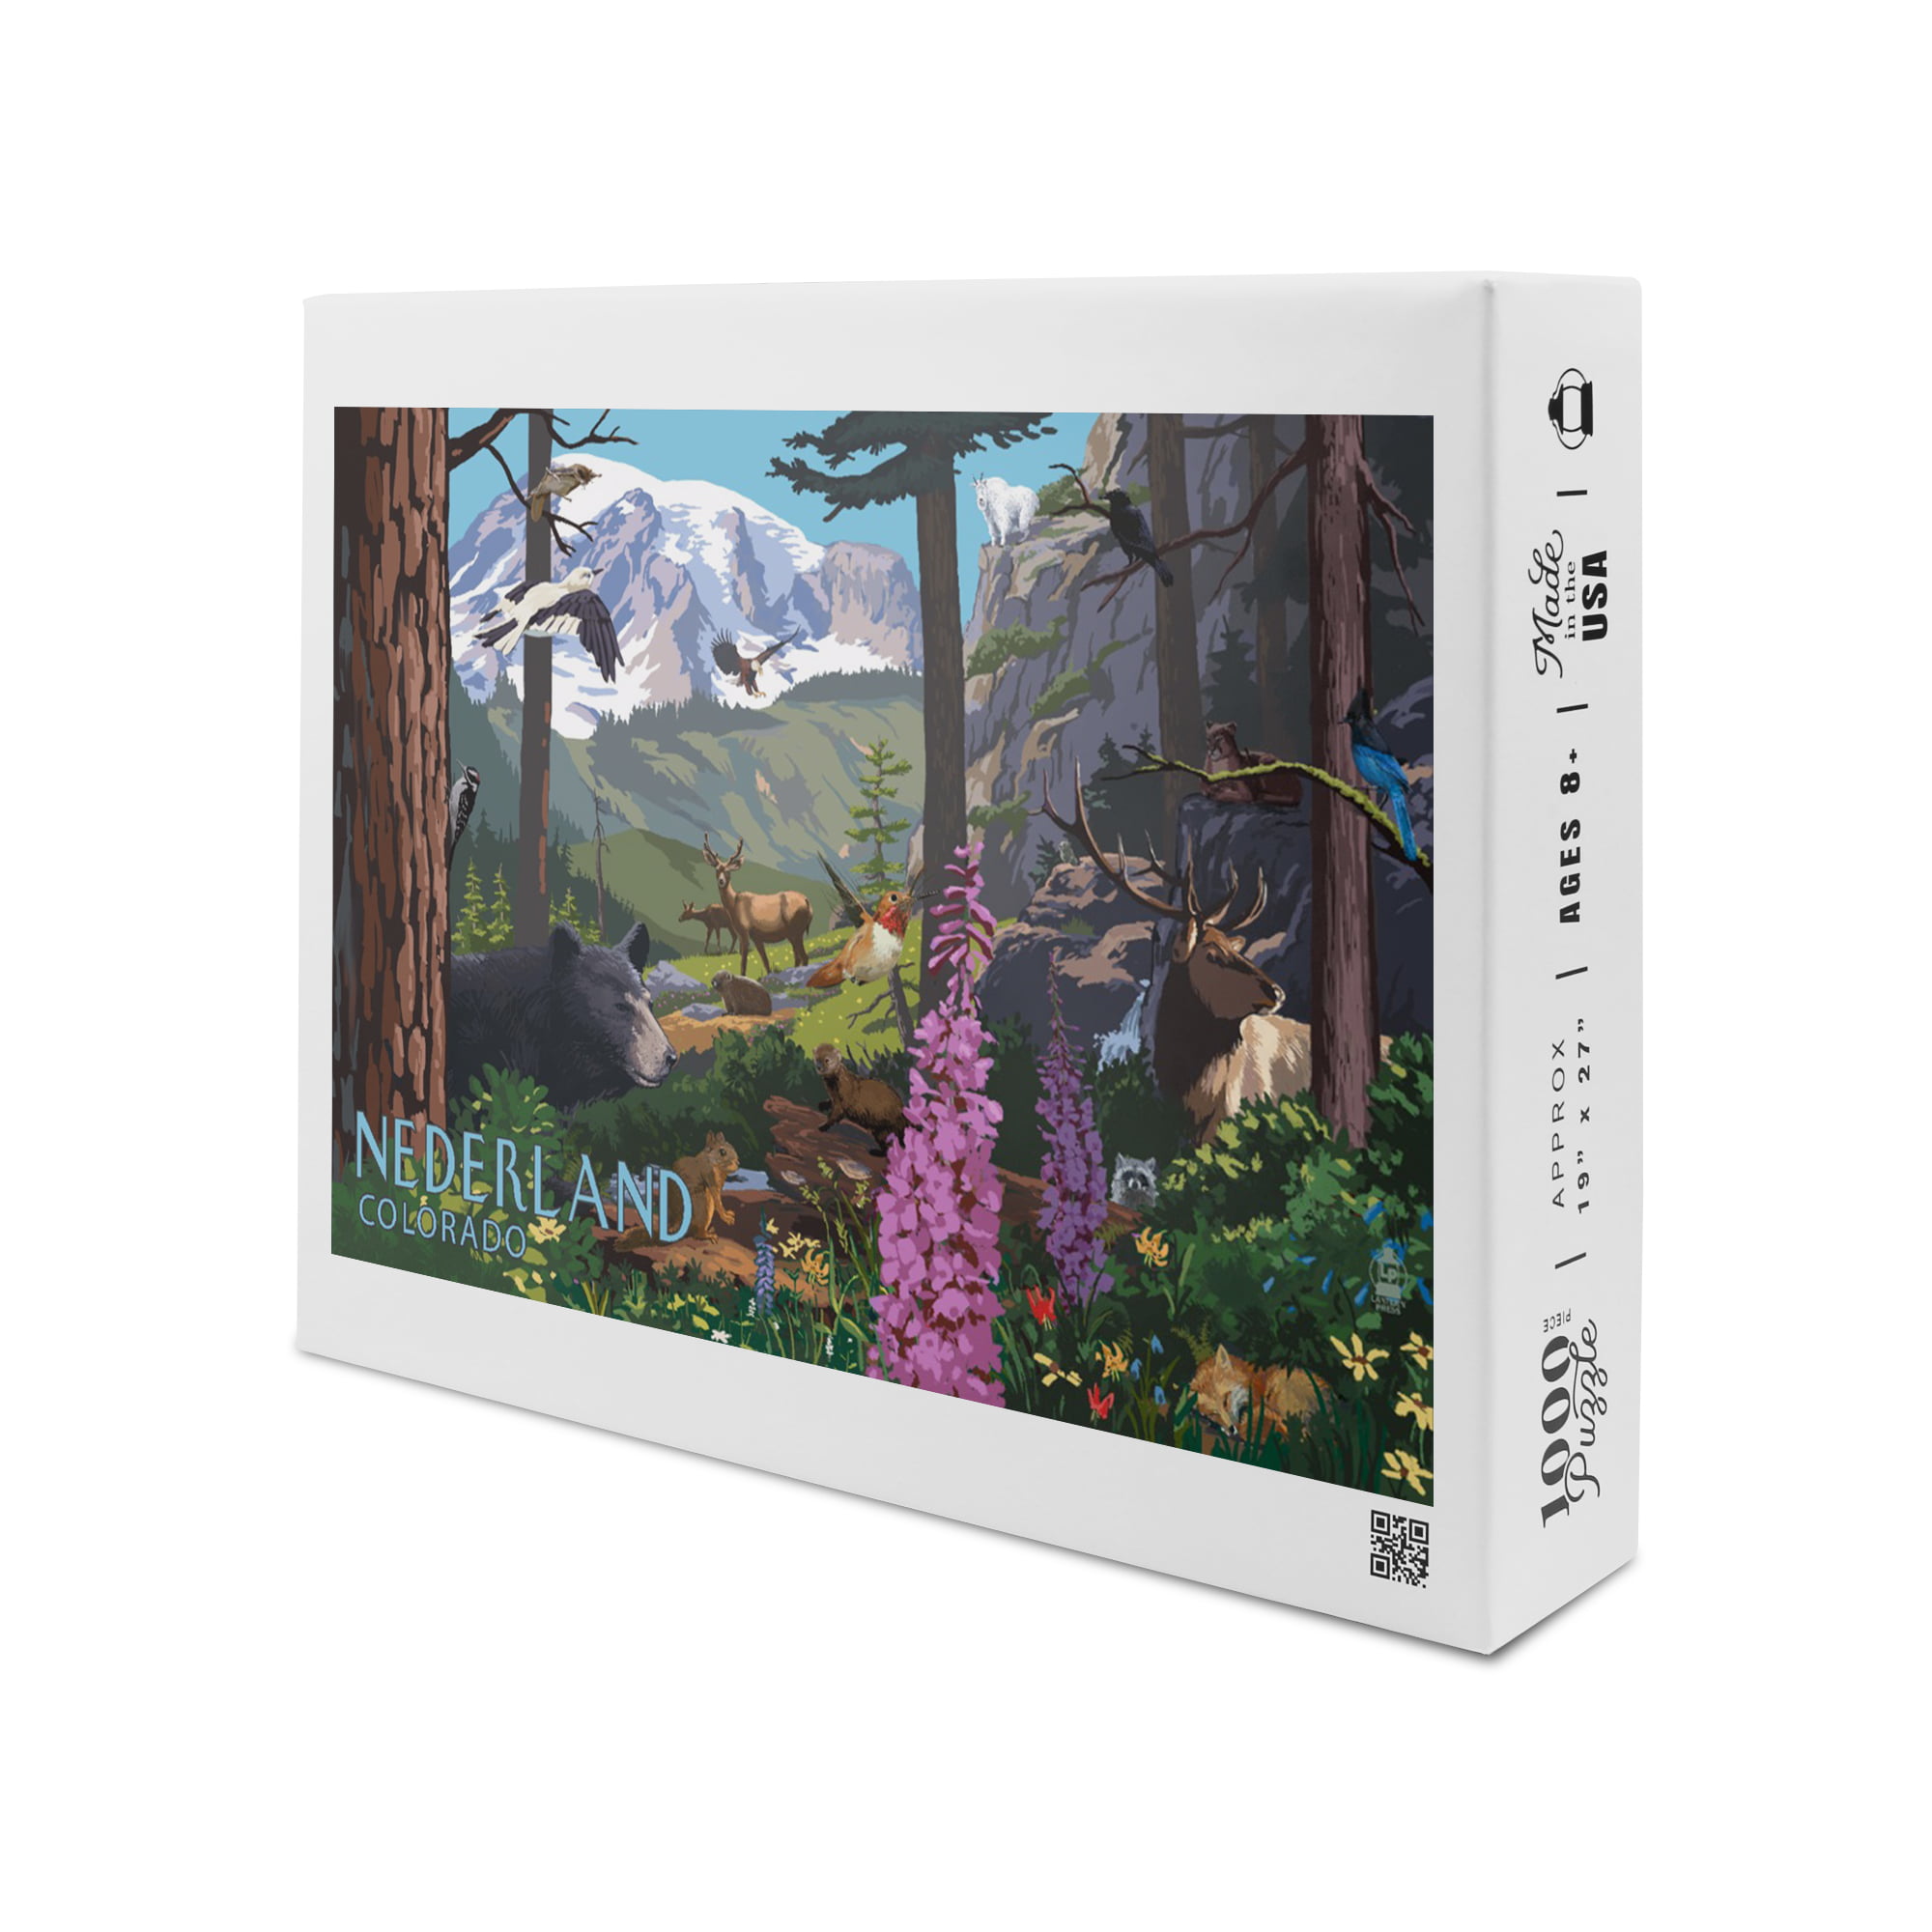 Persoonlijk verbannen januari Nederland, Colorado, Wildlife Utopia (1000 Piece Puzzle, Size 19x27,  Challenging Jigsaw Puzzle for Adults and Family, Made in USA) - Walmart.com